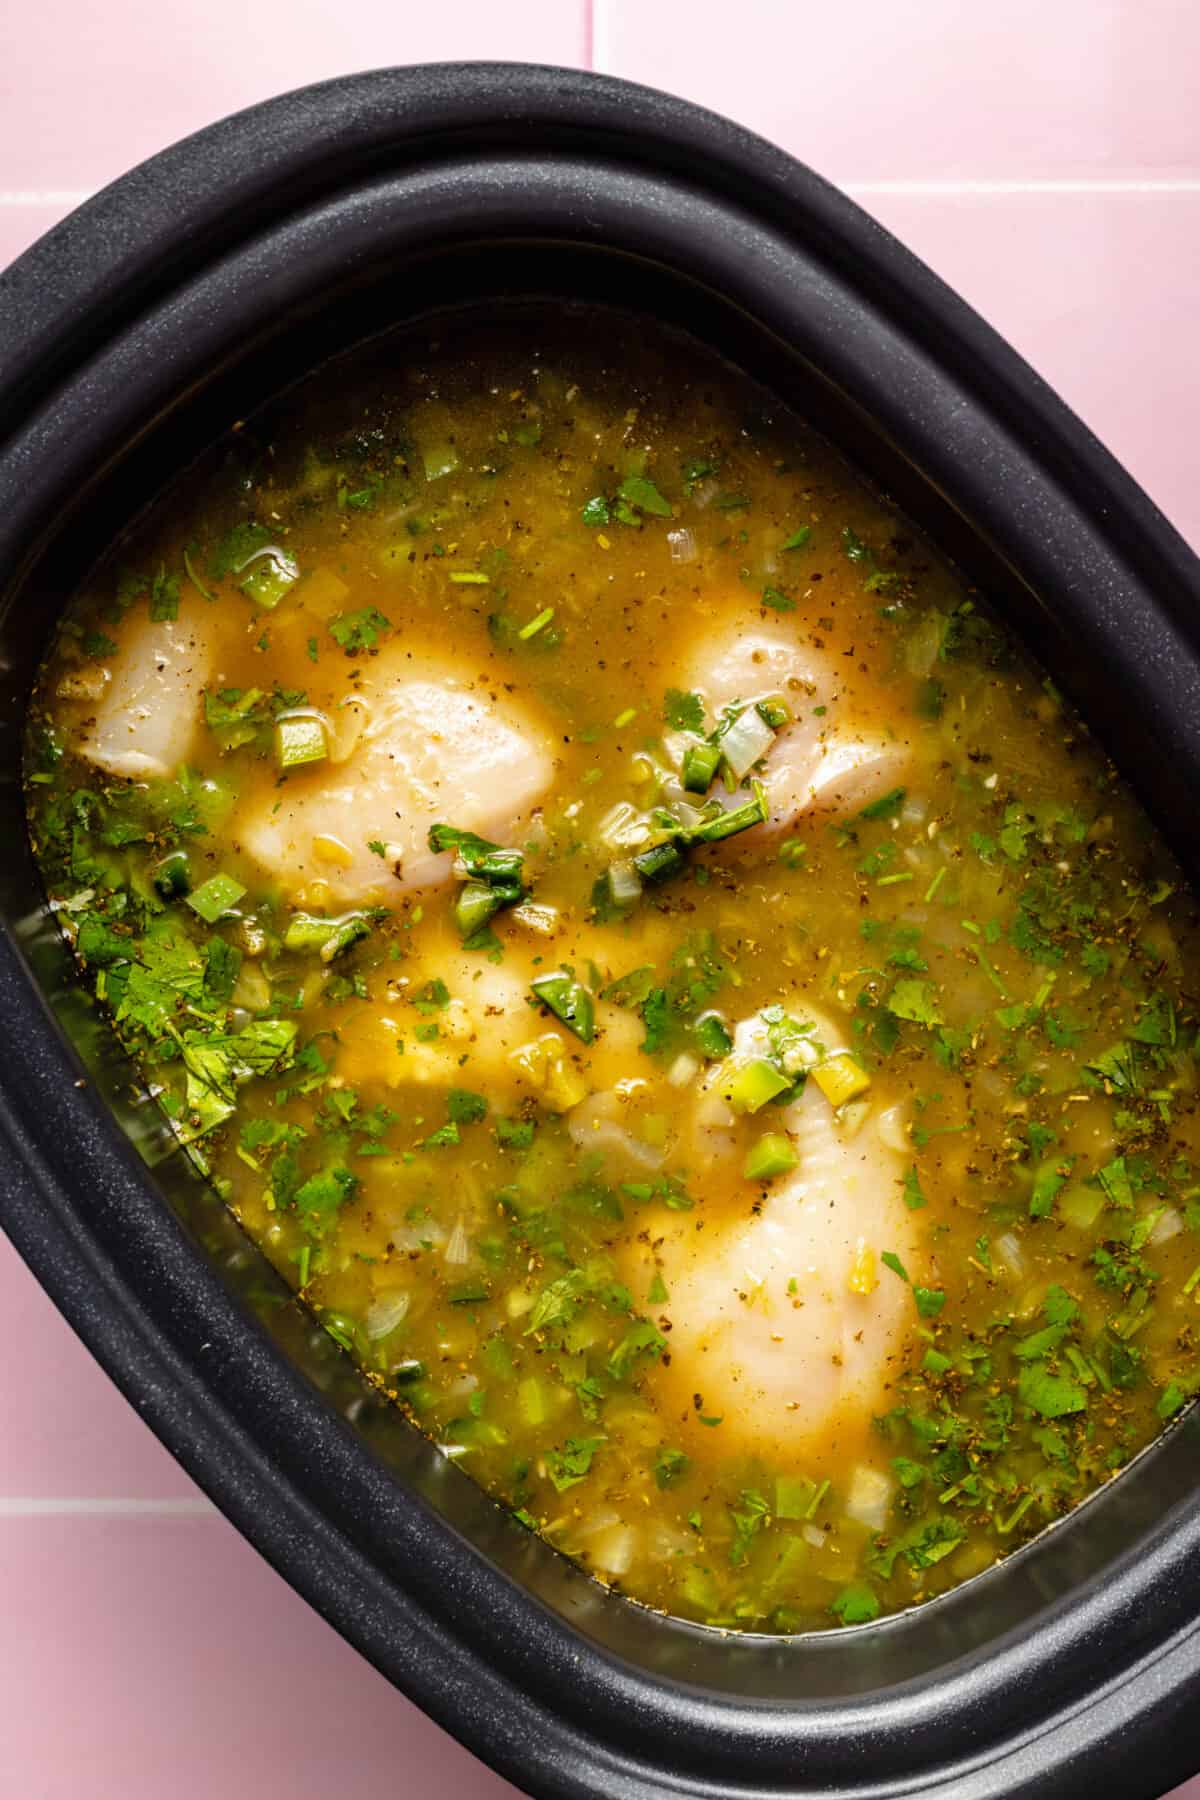 Raw chicken, broth, and other ingredients in slow cooker.